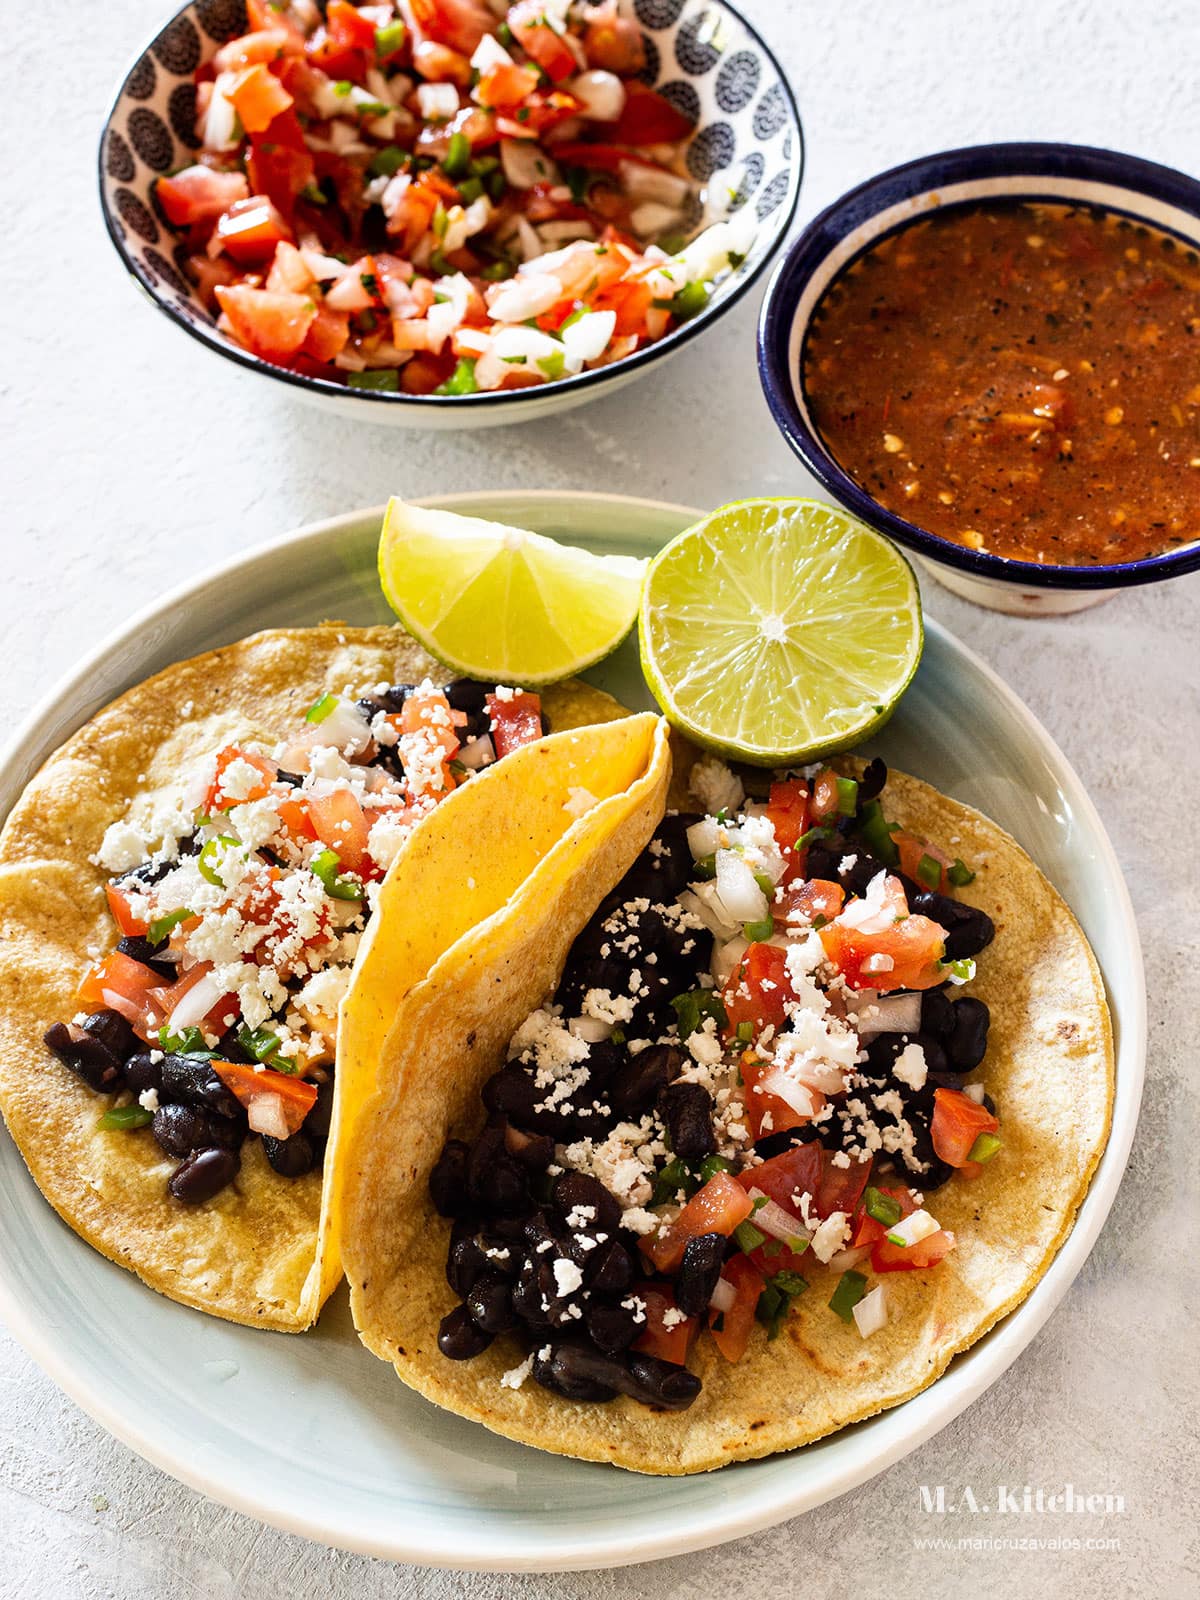 Mexican black beans tacos with pico de gallo salsa, queso fresco, and roasted salsa. Served in a plate.